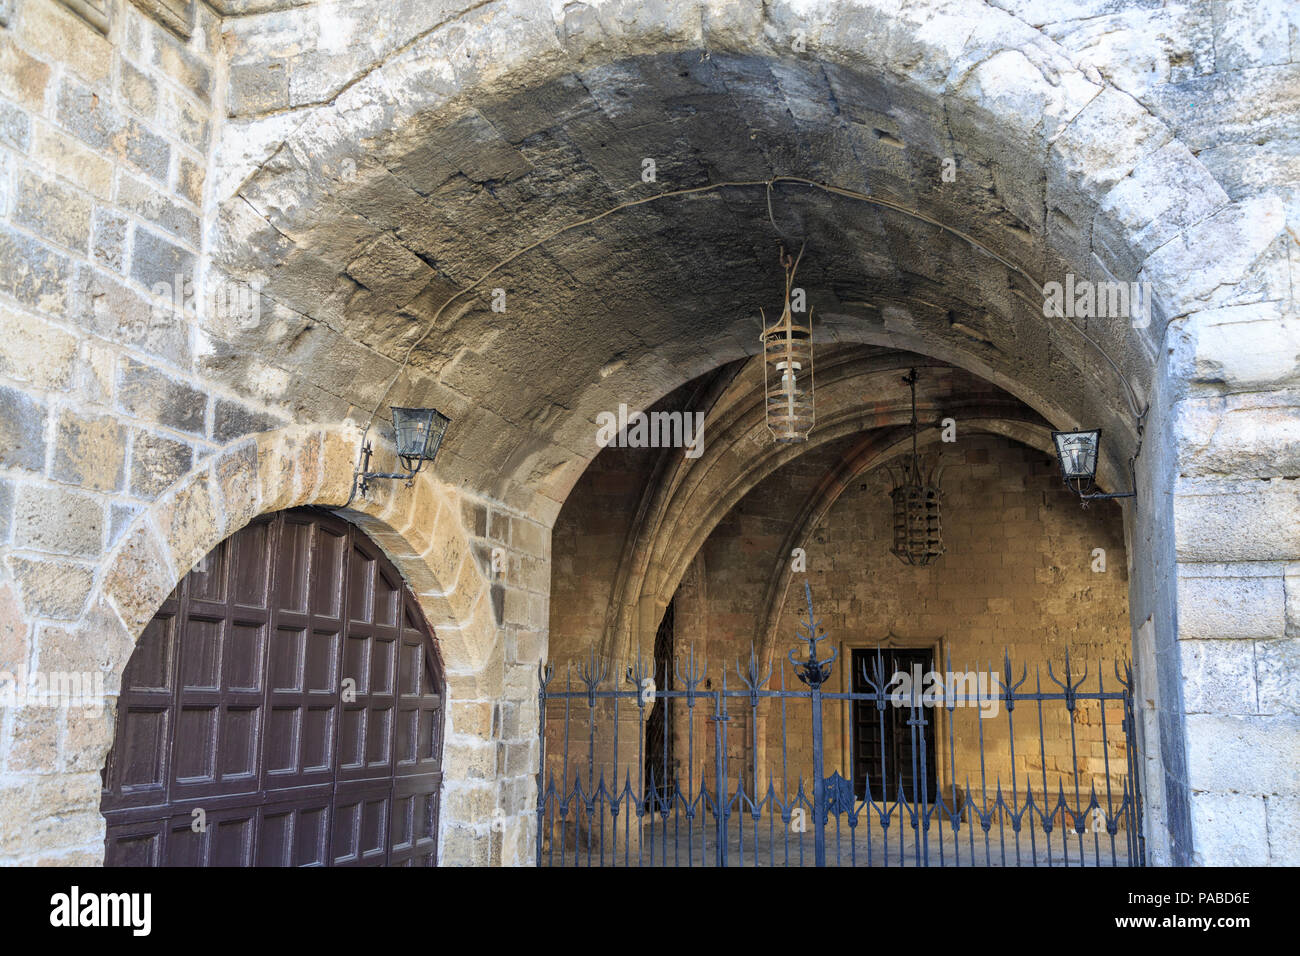 Under Castellania in Hippocrates square in old town Rhodes, Dodecanese, Greece Stock Photo